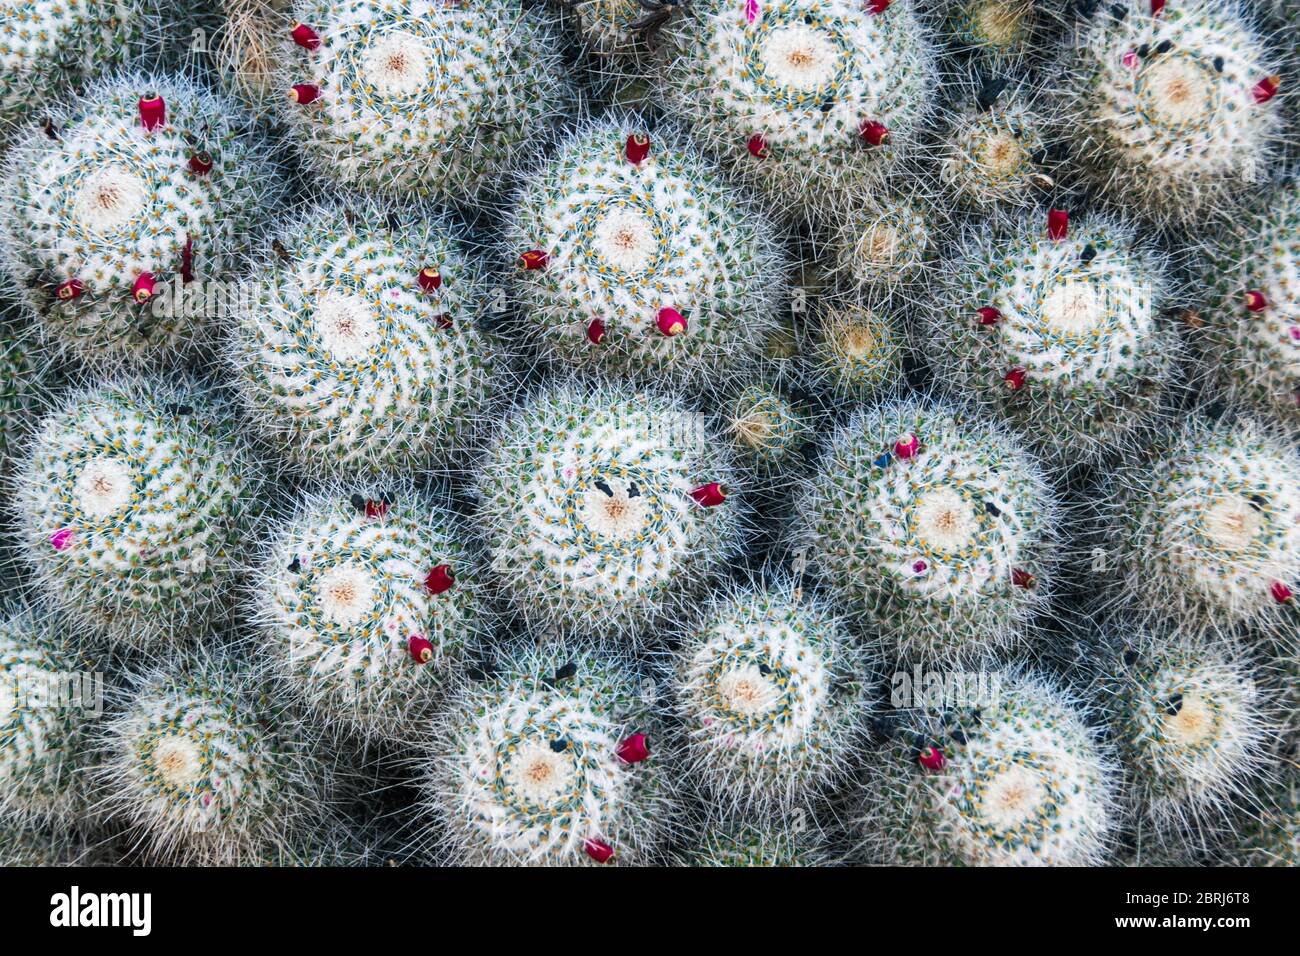 Top-down view of twin spined cactus (mammillaria geminispina) after flowering, with red fruits. Interesting detailed natural background. Stock Photo